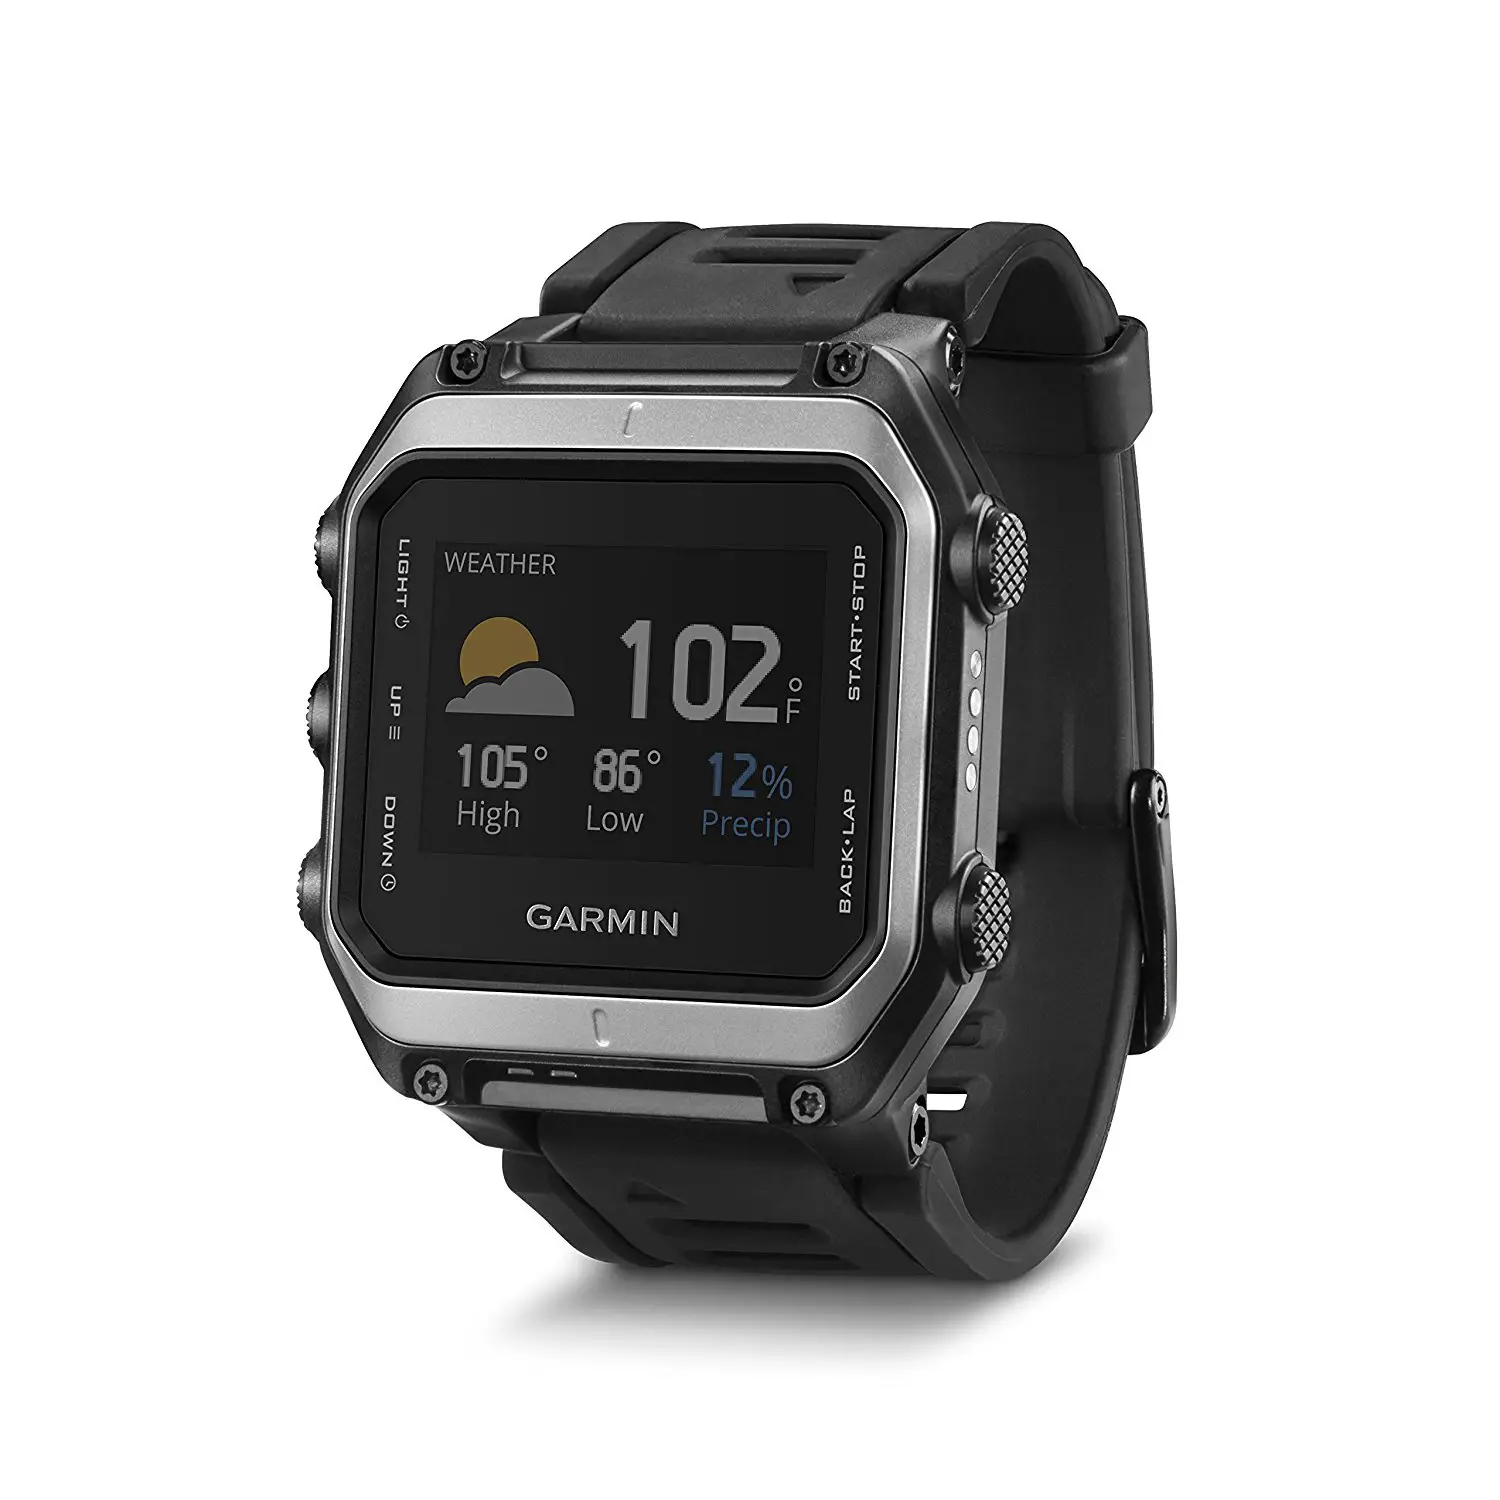 Top 5 GPS Watches for Hiking